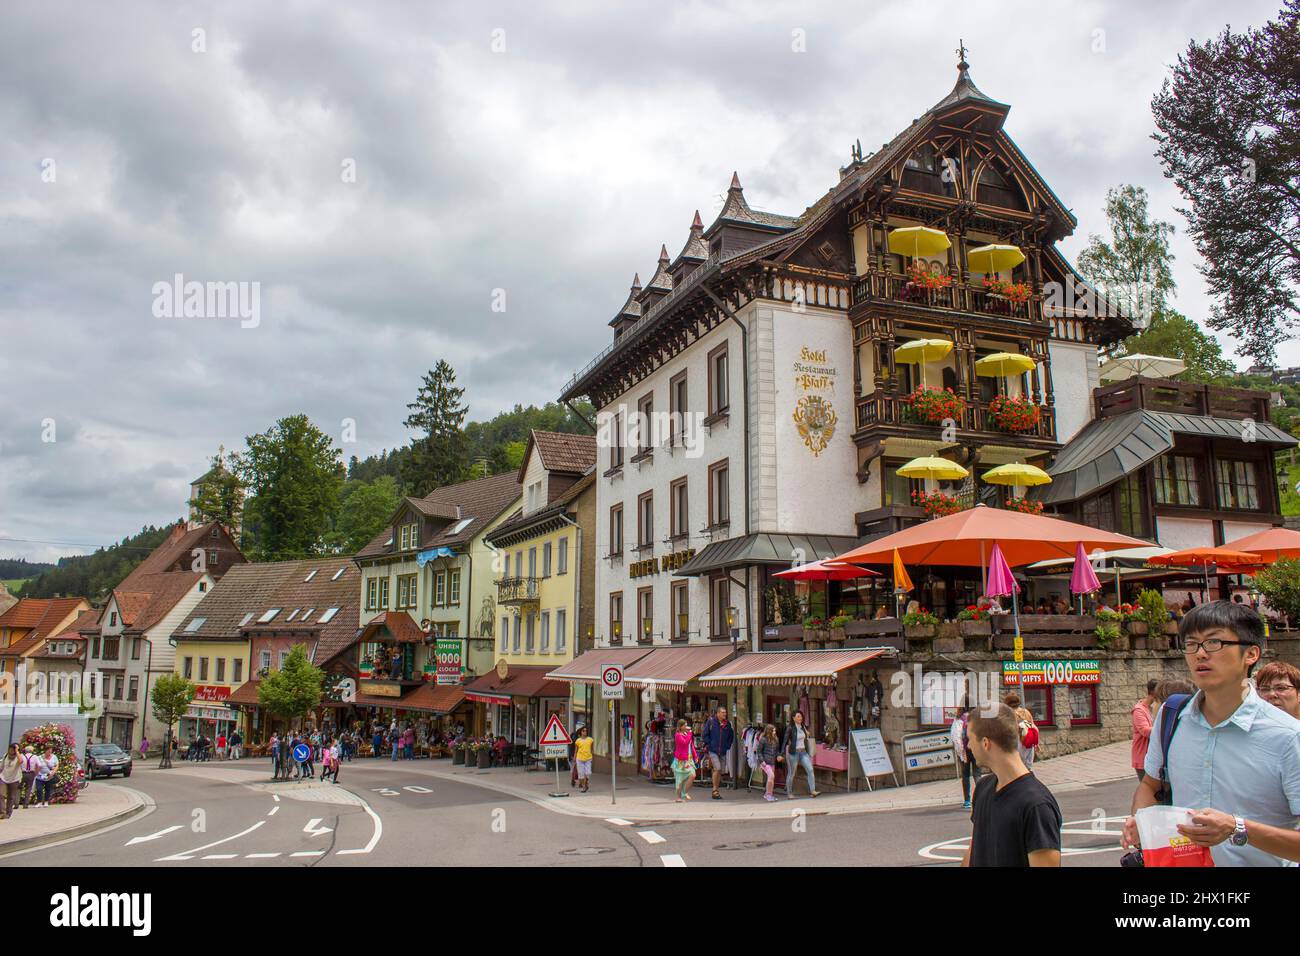 TRIBERG - JULY 23 2017: Traditional style houses in the Schwarzwald region, Germany. Stock Photo